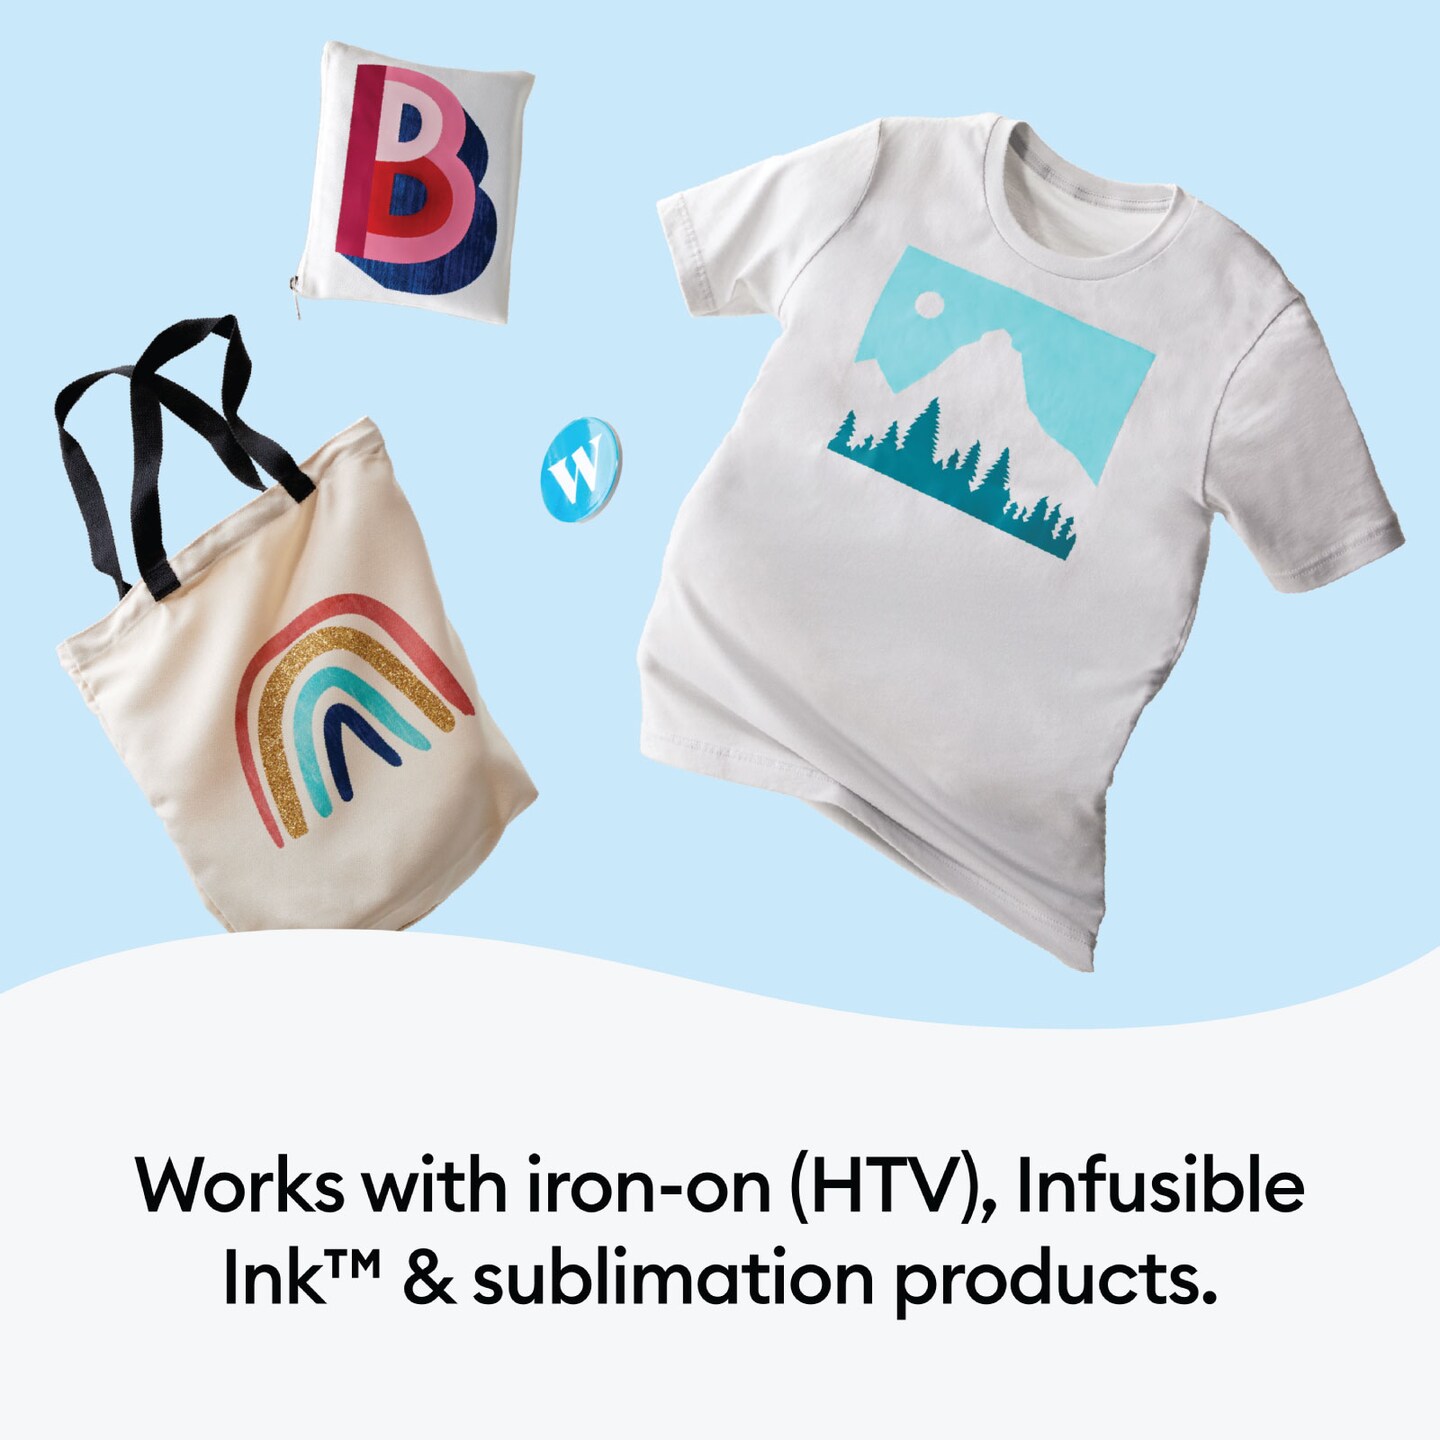 Sublimation shirts on sale @Cricut price match them at @Michaels Store